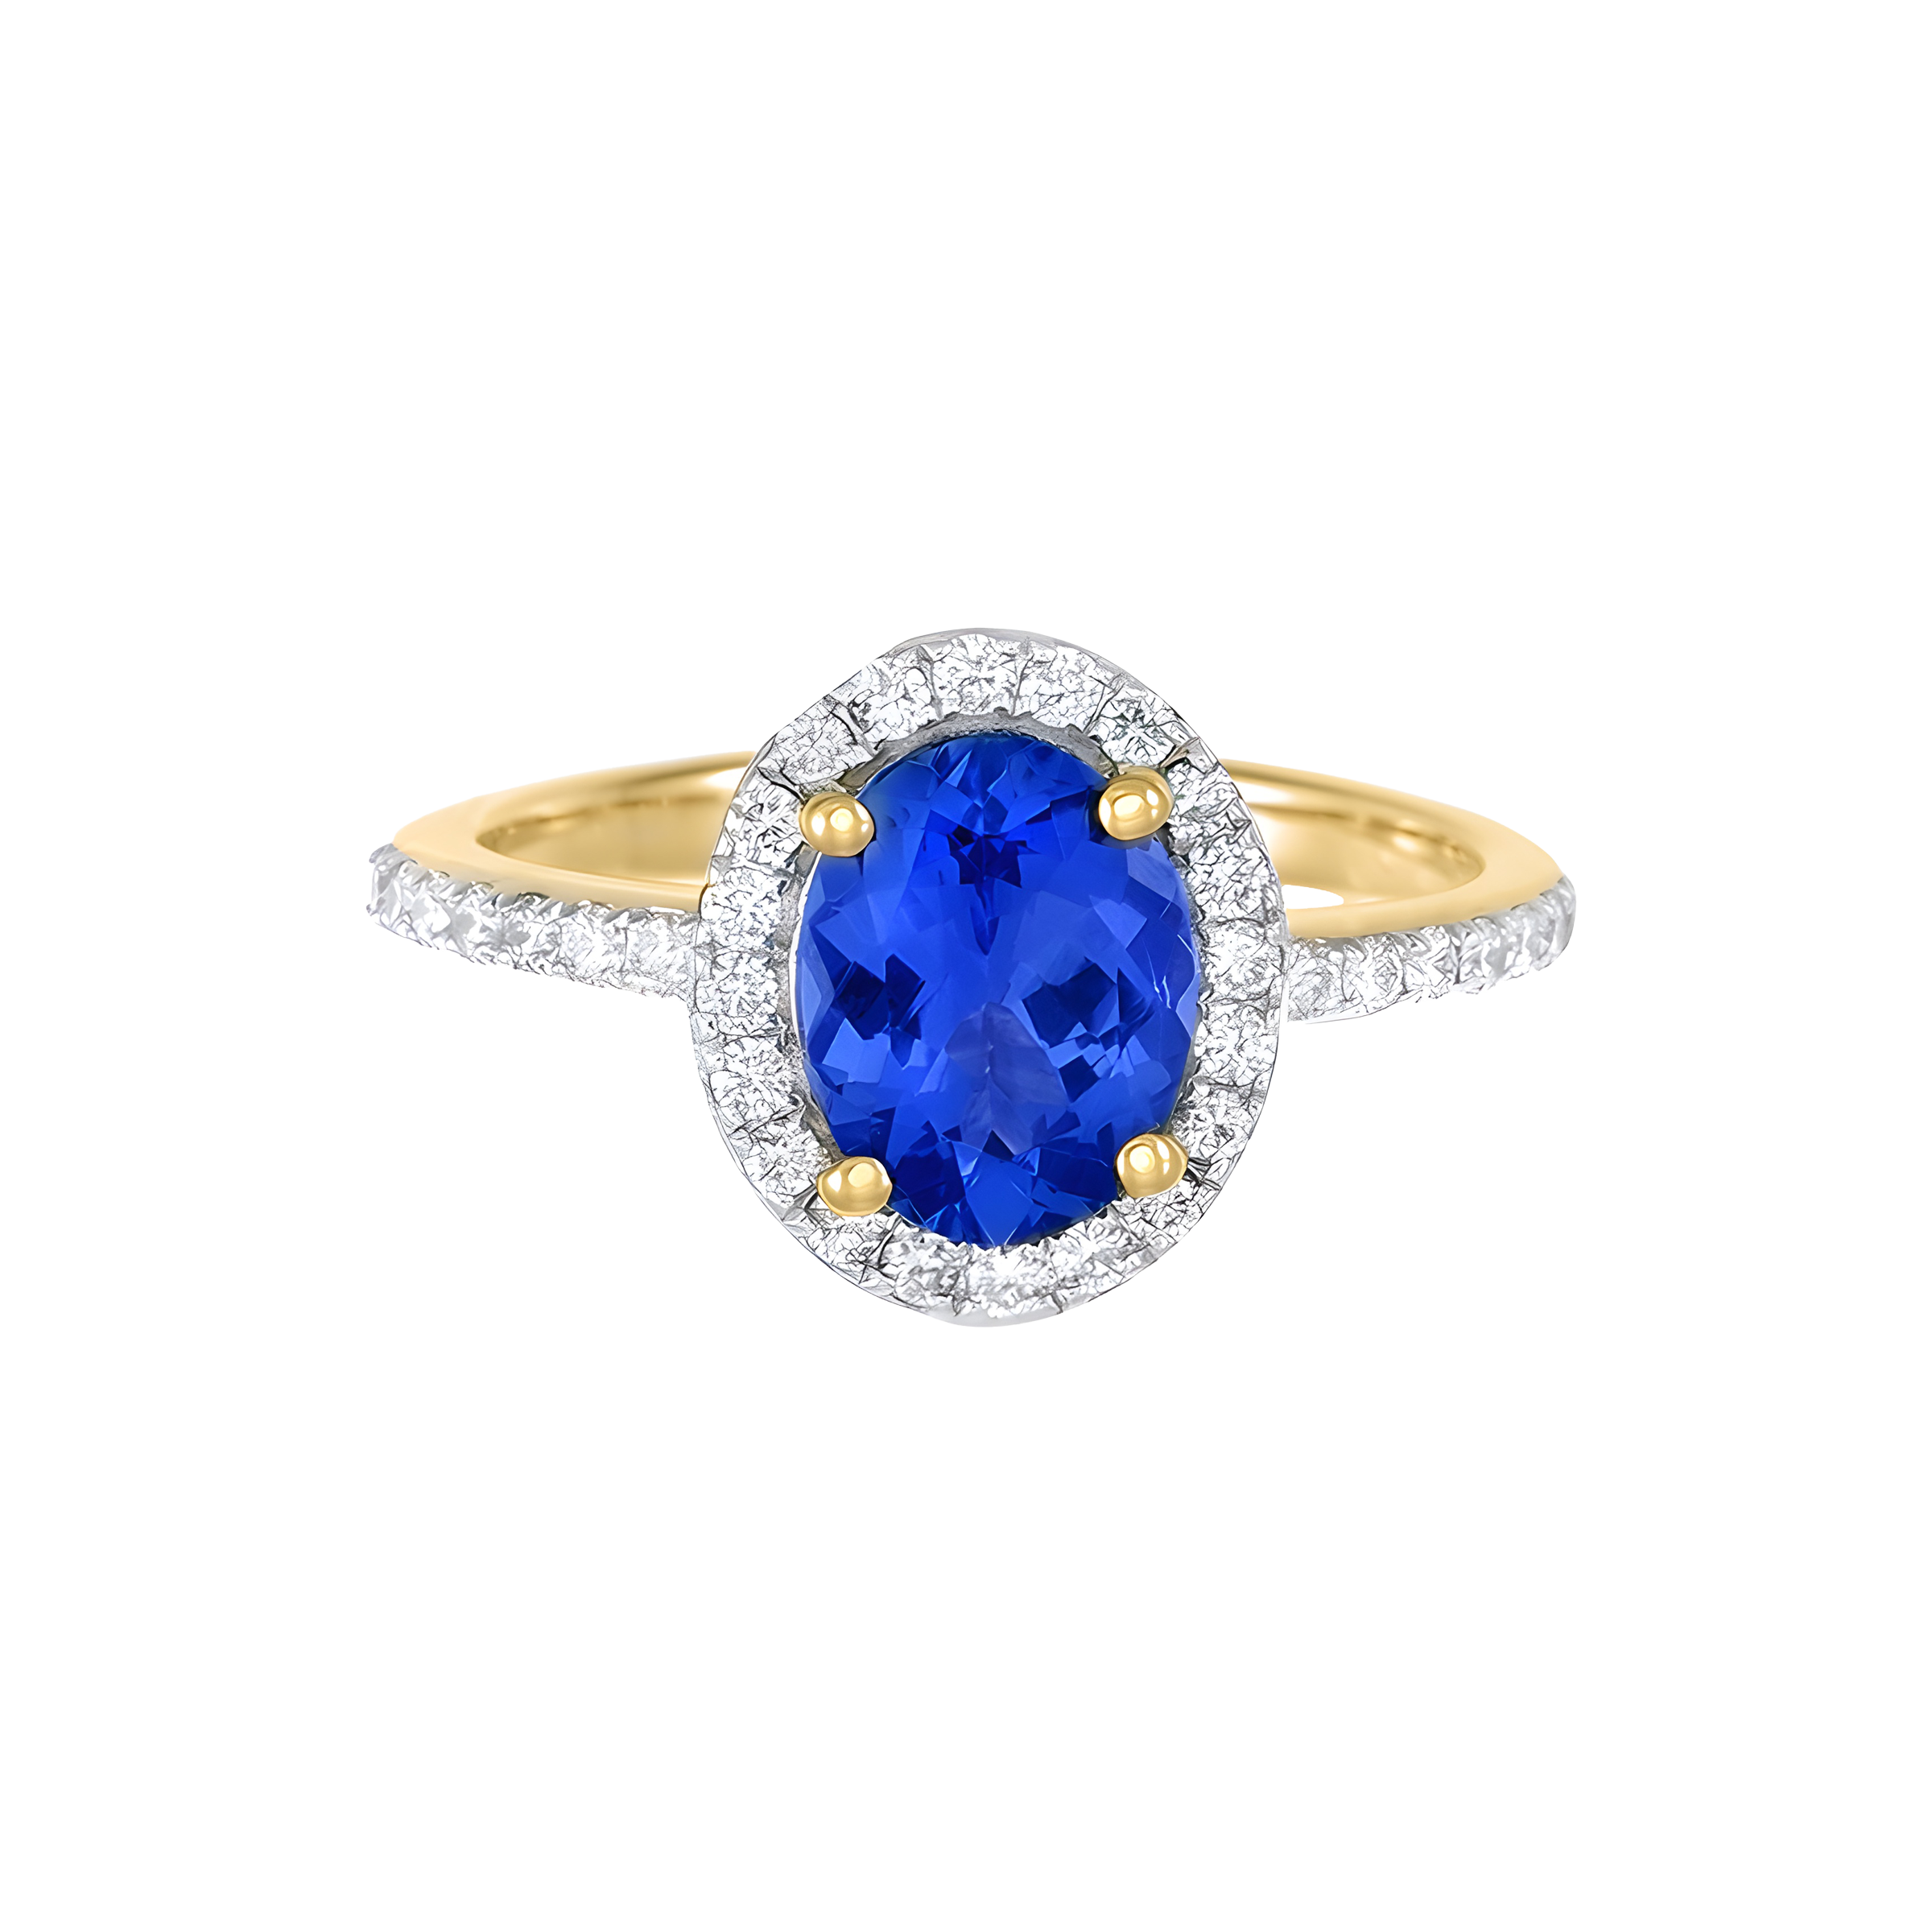 Oval Tanzanite and Diamond Halo Ring in 18k Yellow Gold